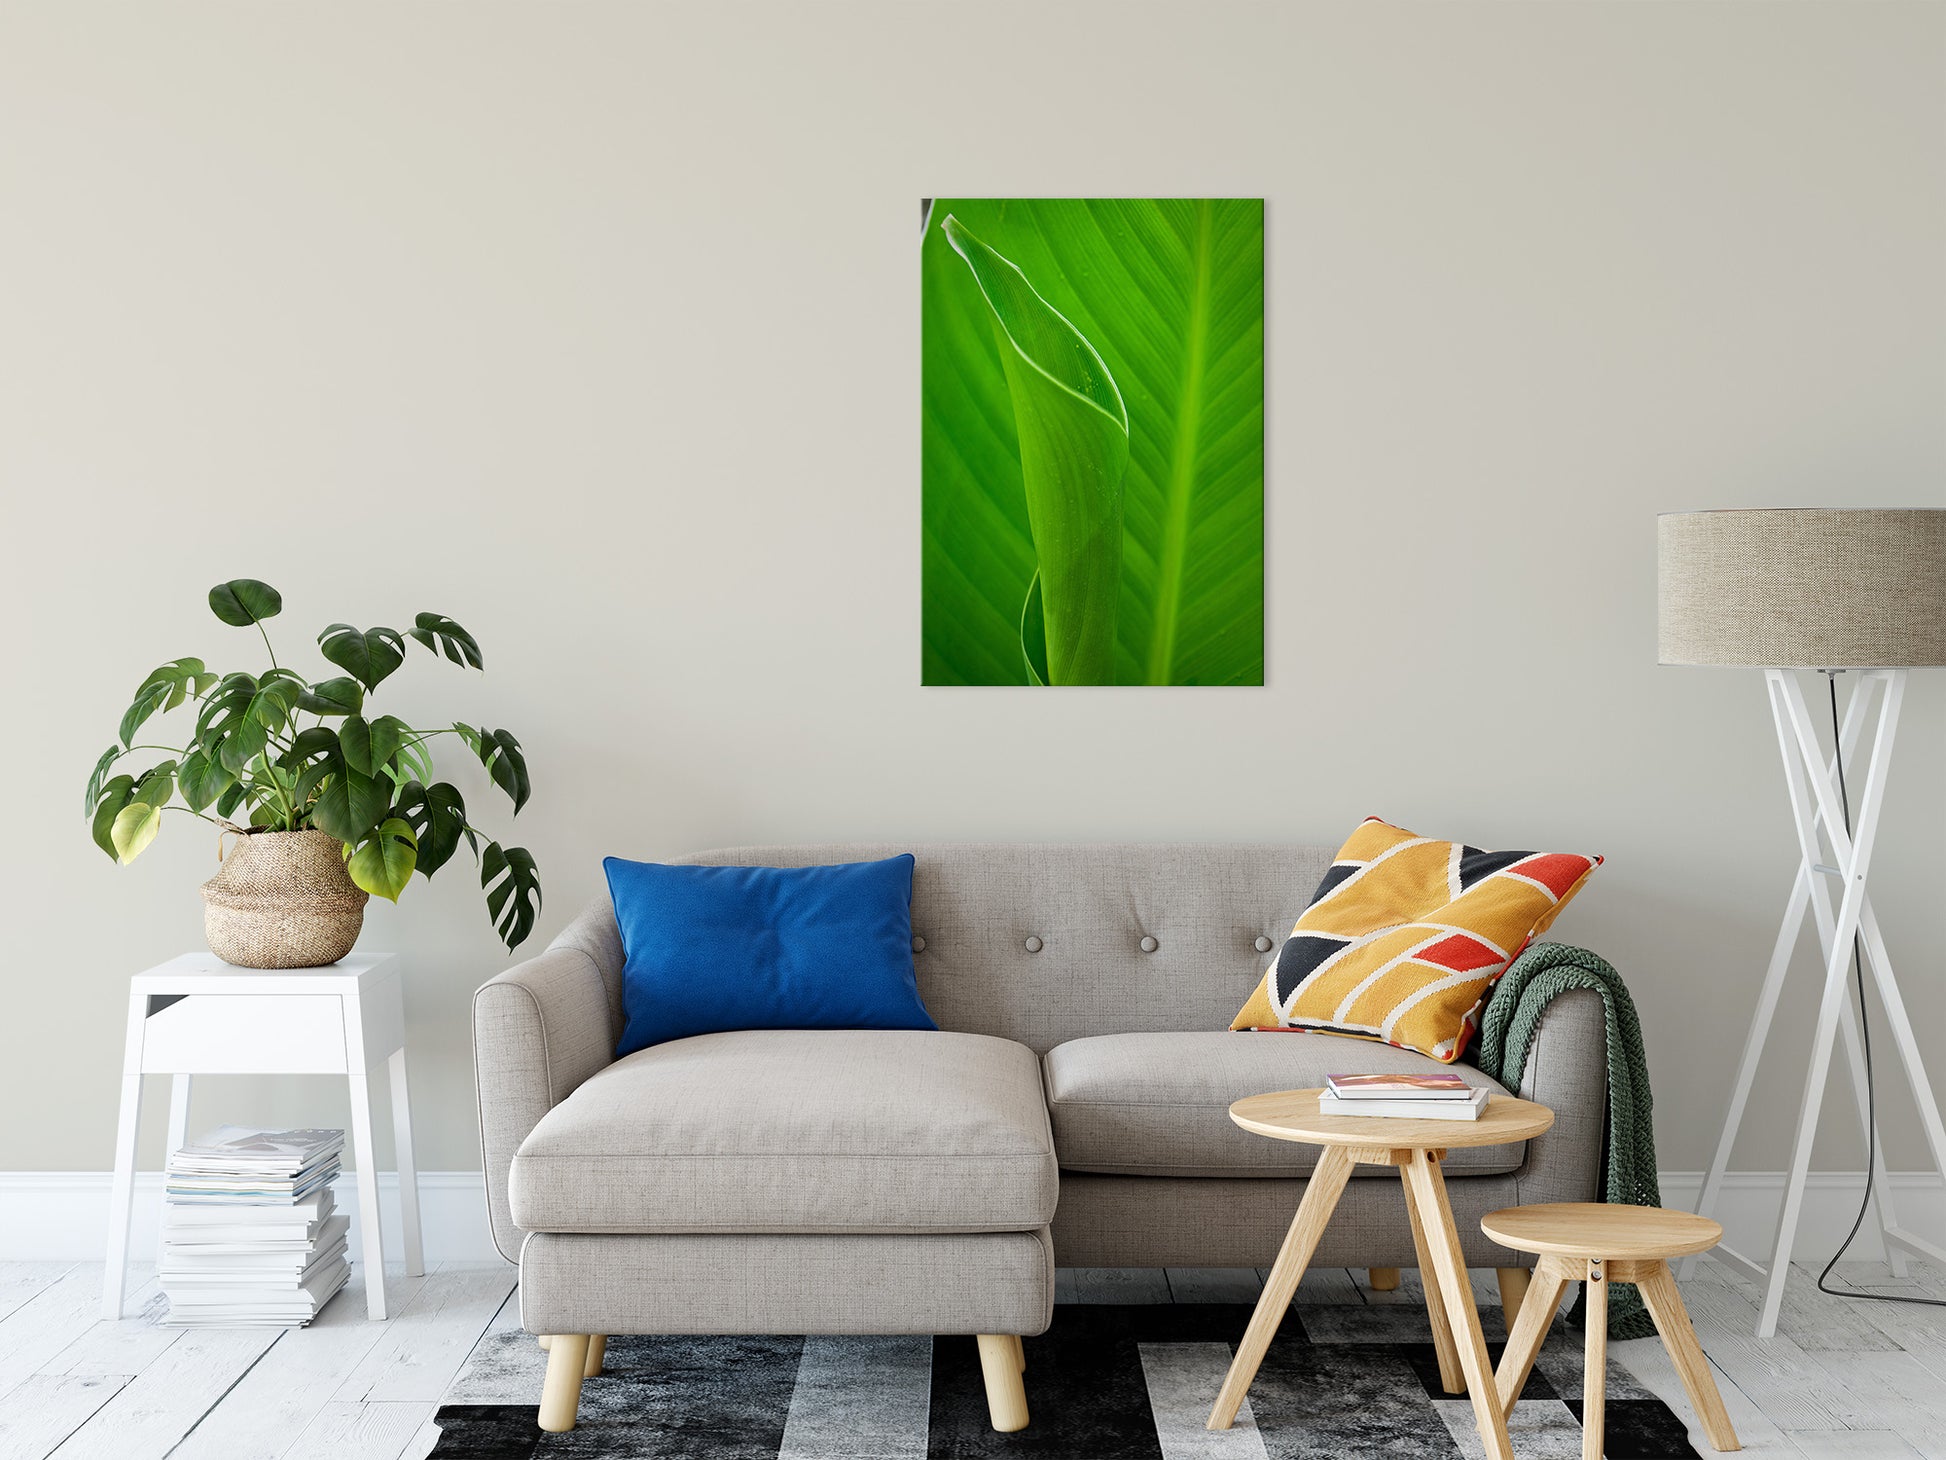 Leaves Canna Lily Plant Nature / Botanical Photo Fine Art Canvas Wall Art Prints 24" x 36" - PIPAFINEART